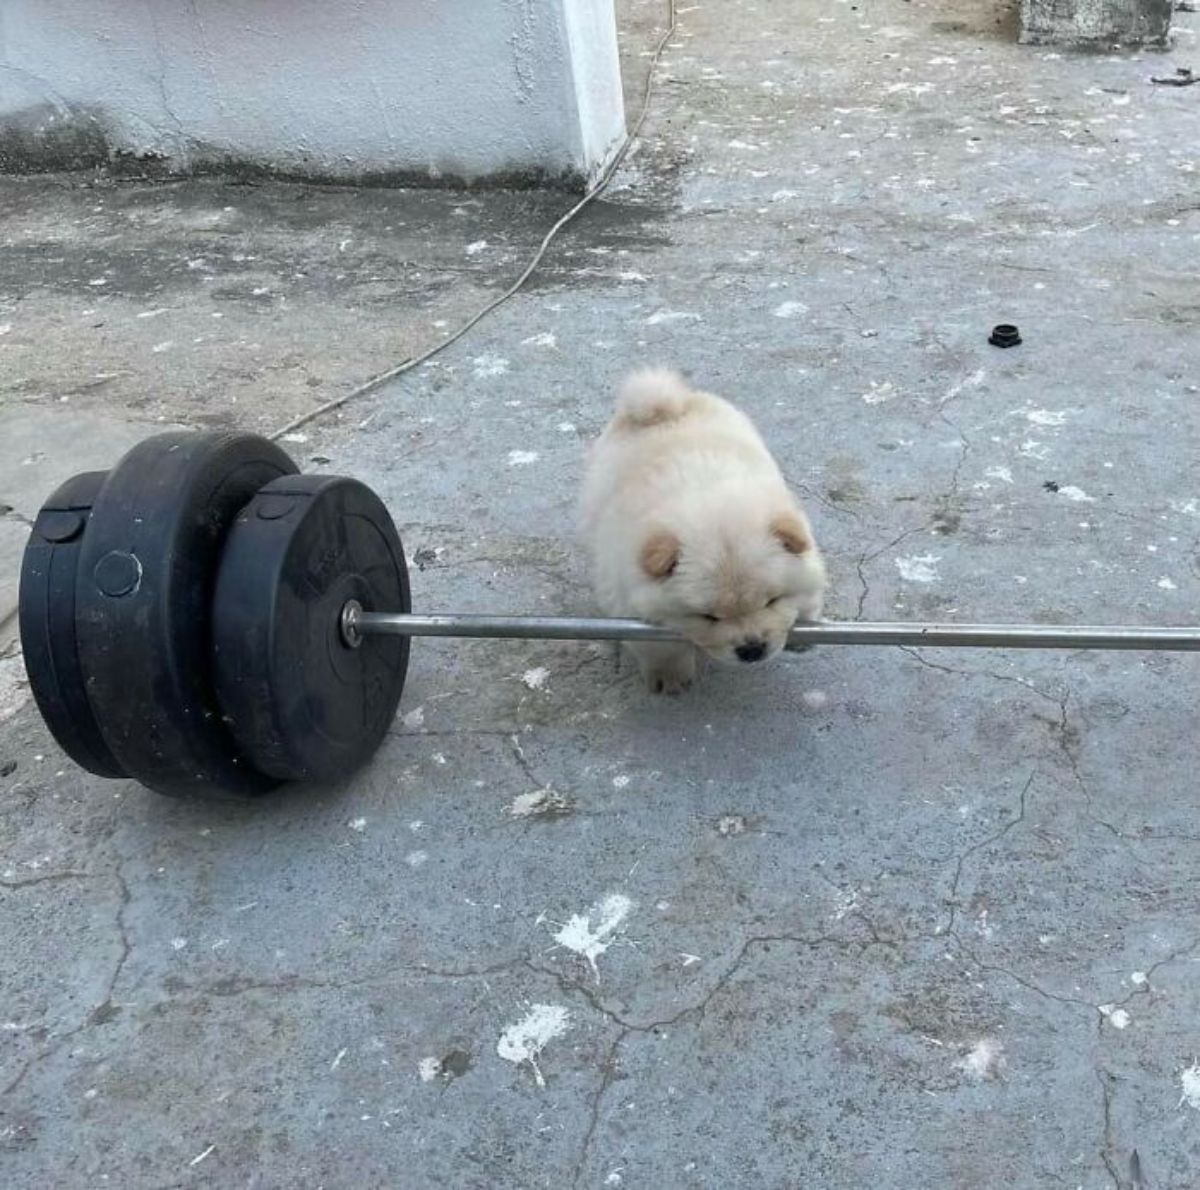 small fluffy puppy holding the bar with weights on with its mouth